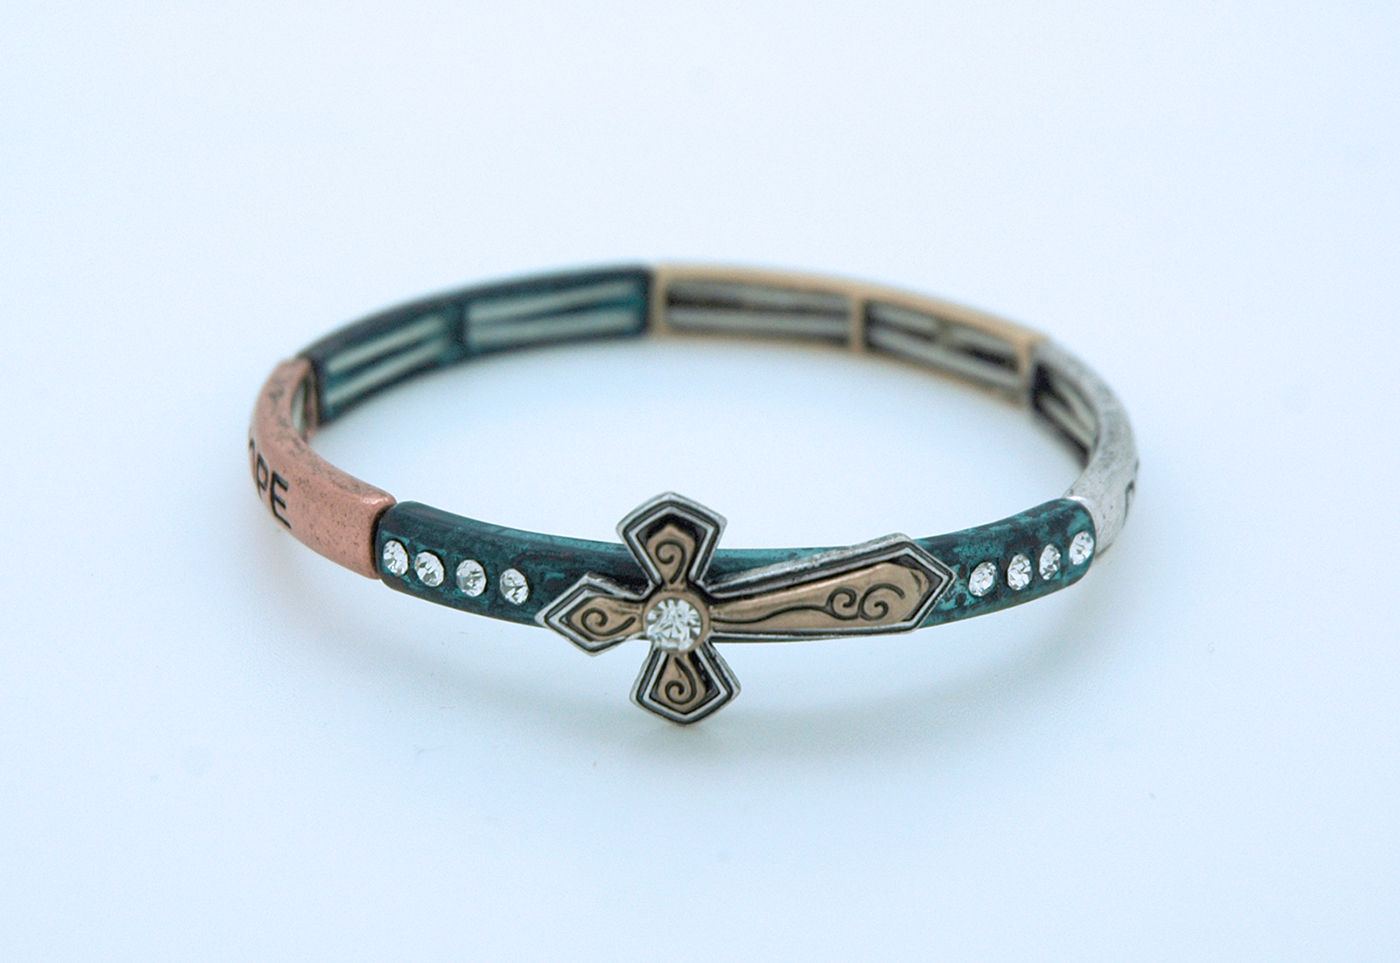 CU4238 - Metal Bracelet with Cross and Crystals, "Hope" on Side